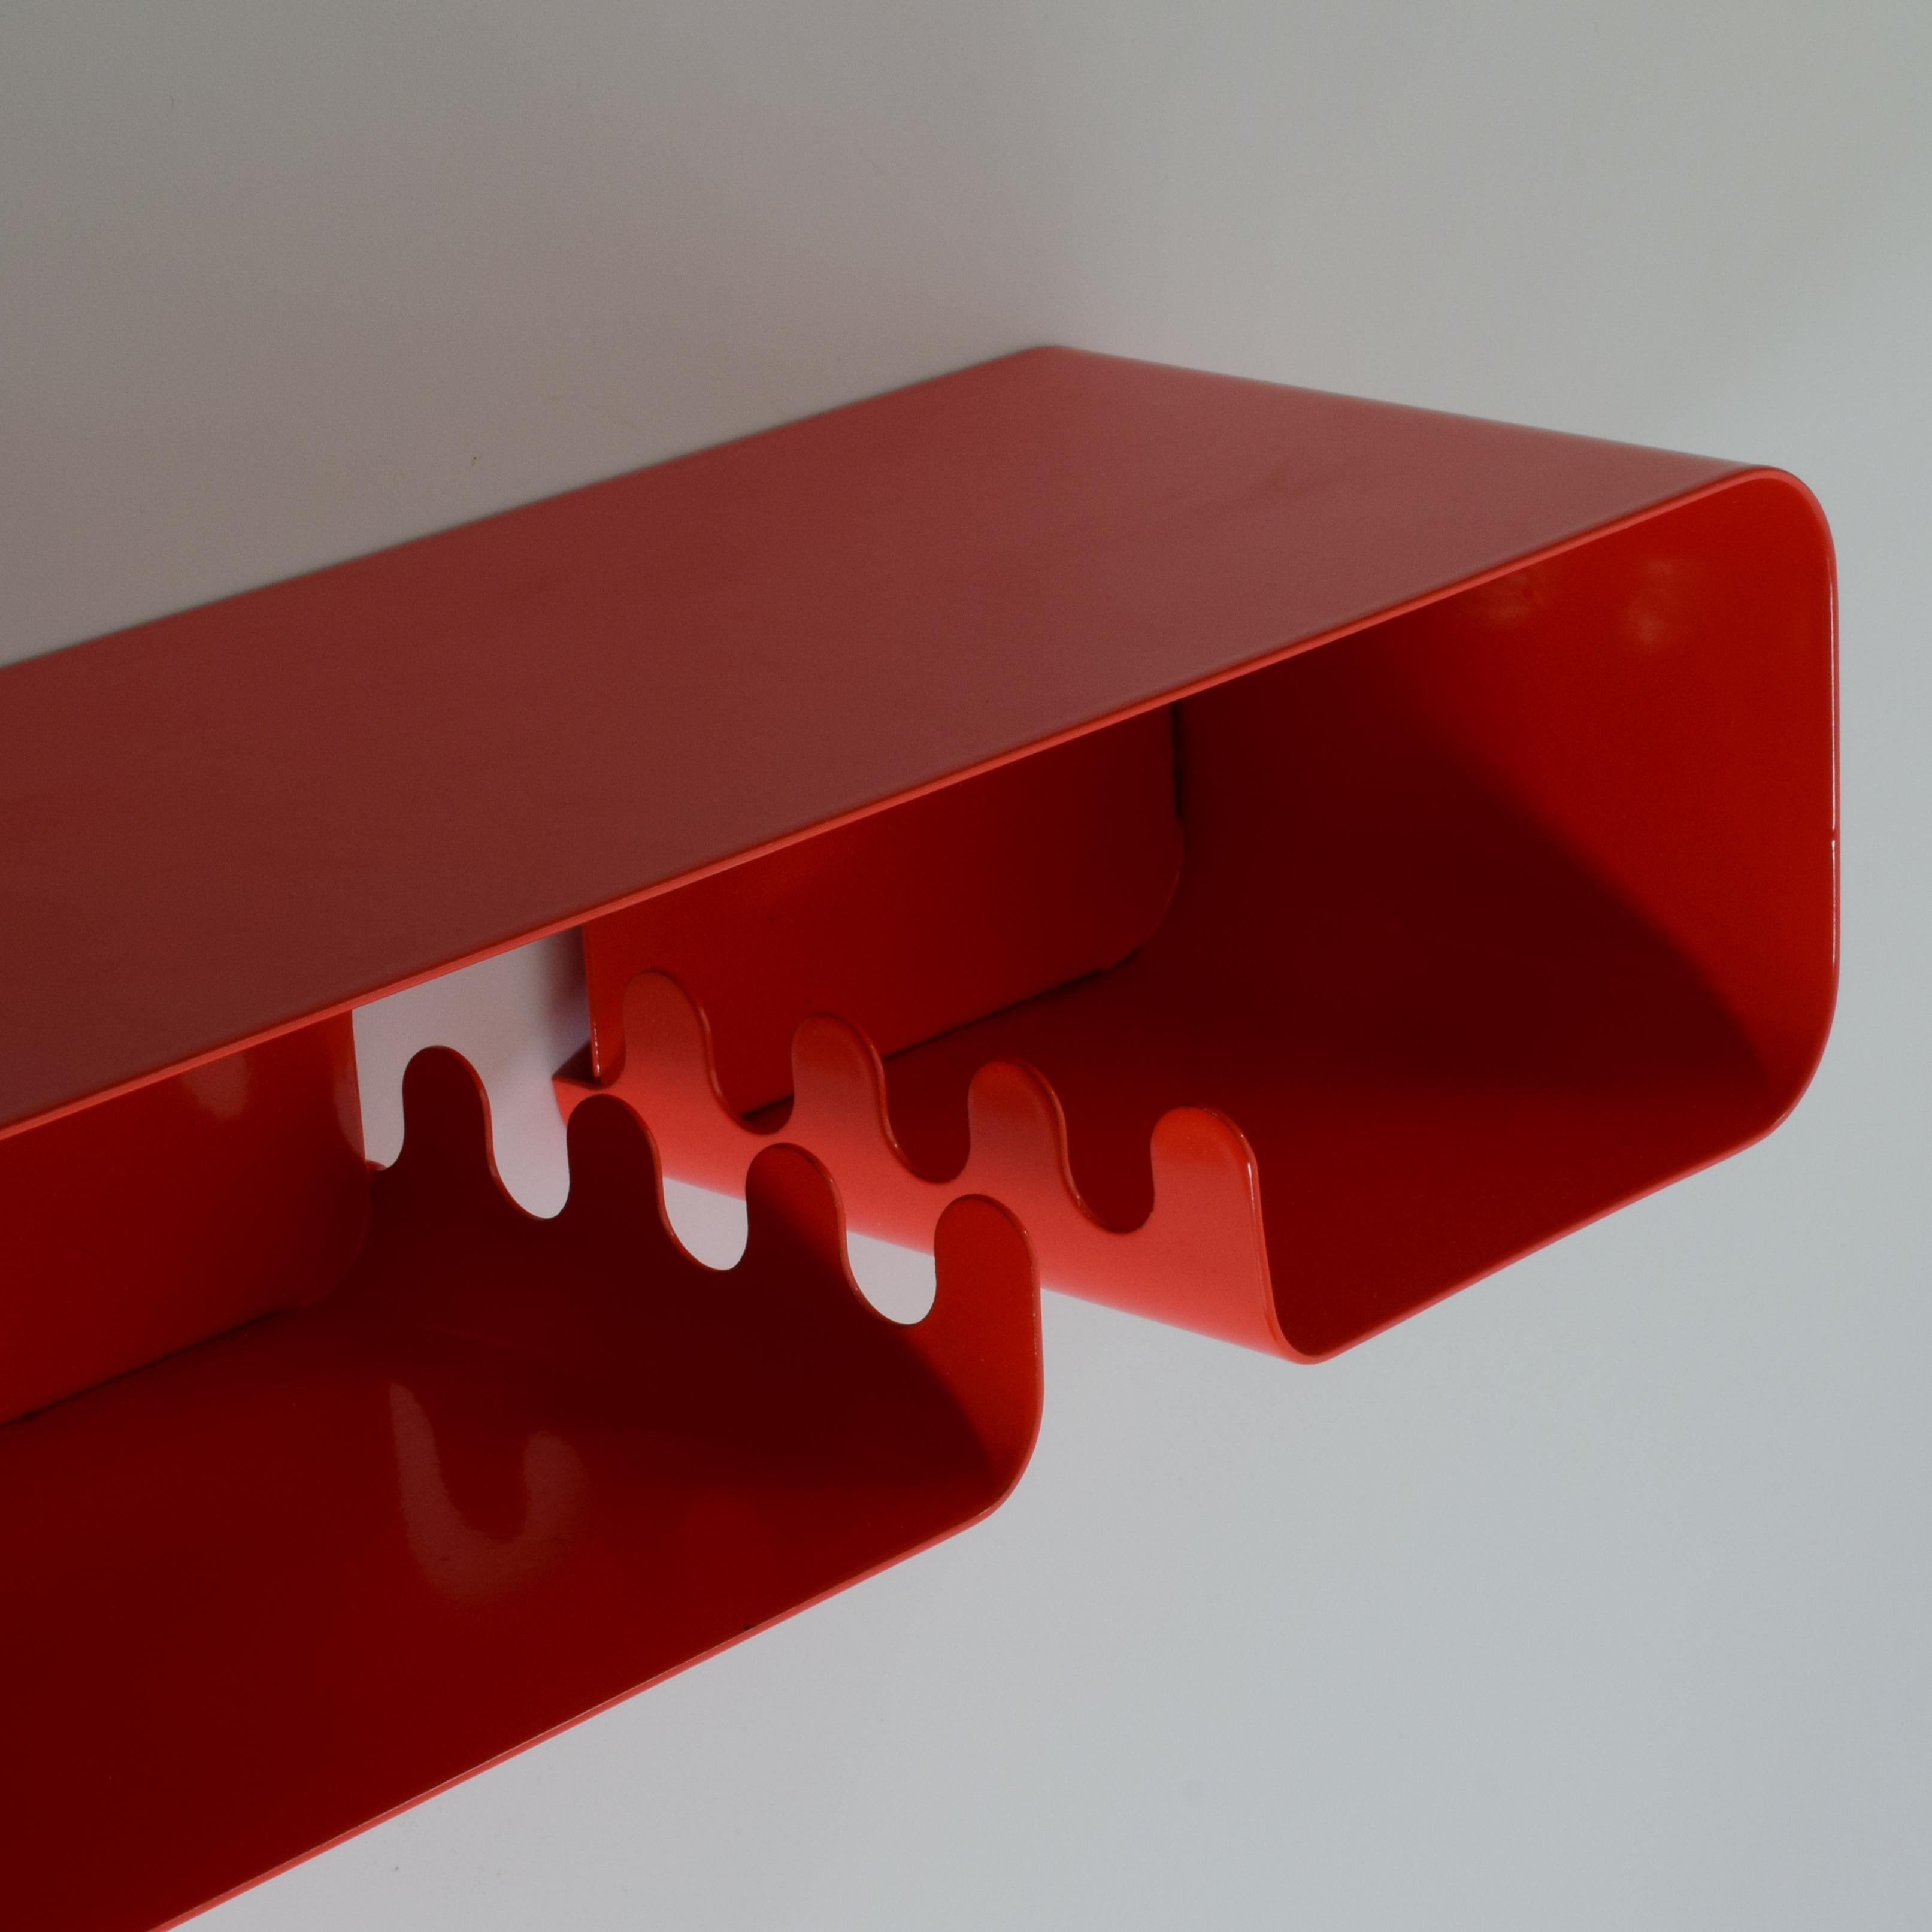 Habitat 'Pop' shelf unit, c. 1980s.
Red lacquered metal with integrated finger-like towel or coat hooks.
Super little wall-mounted shelf units, ideal for entrance areas, kitchens, bathrooms and cloakrooms. 

These units are individually